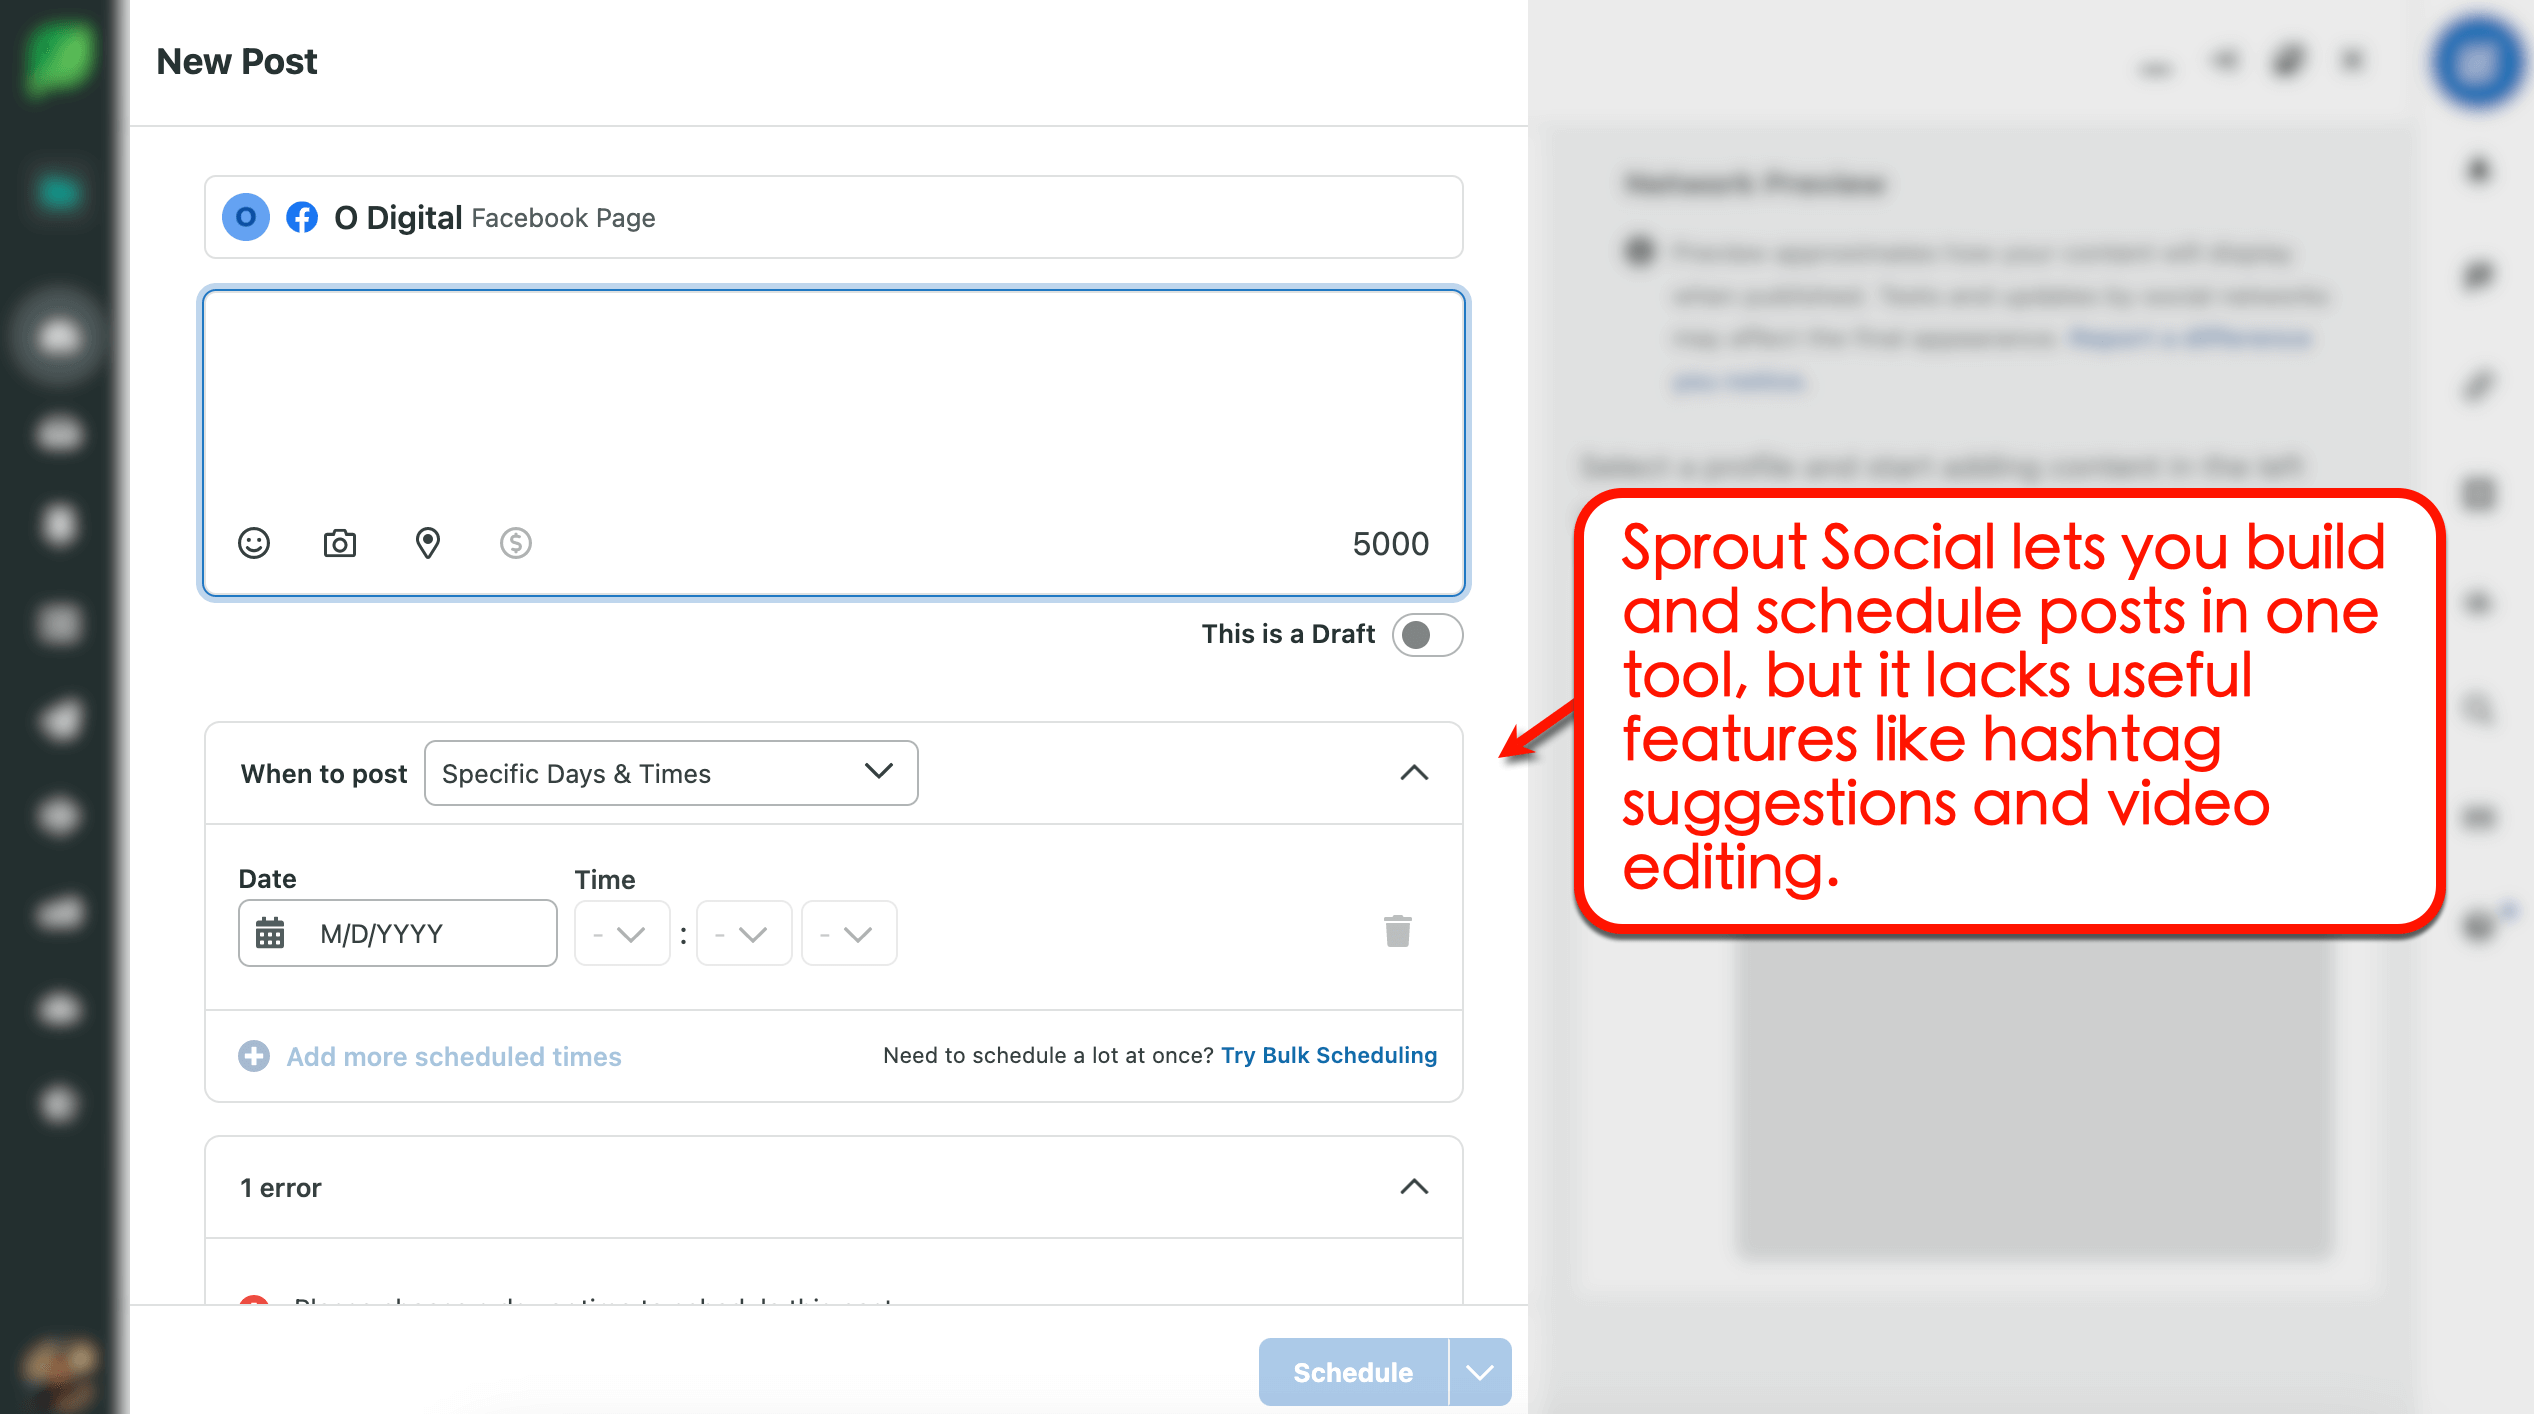 Sprout Social's post editor